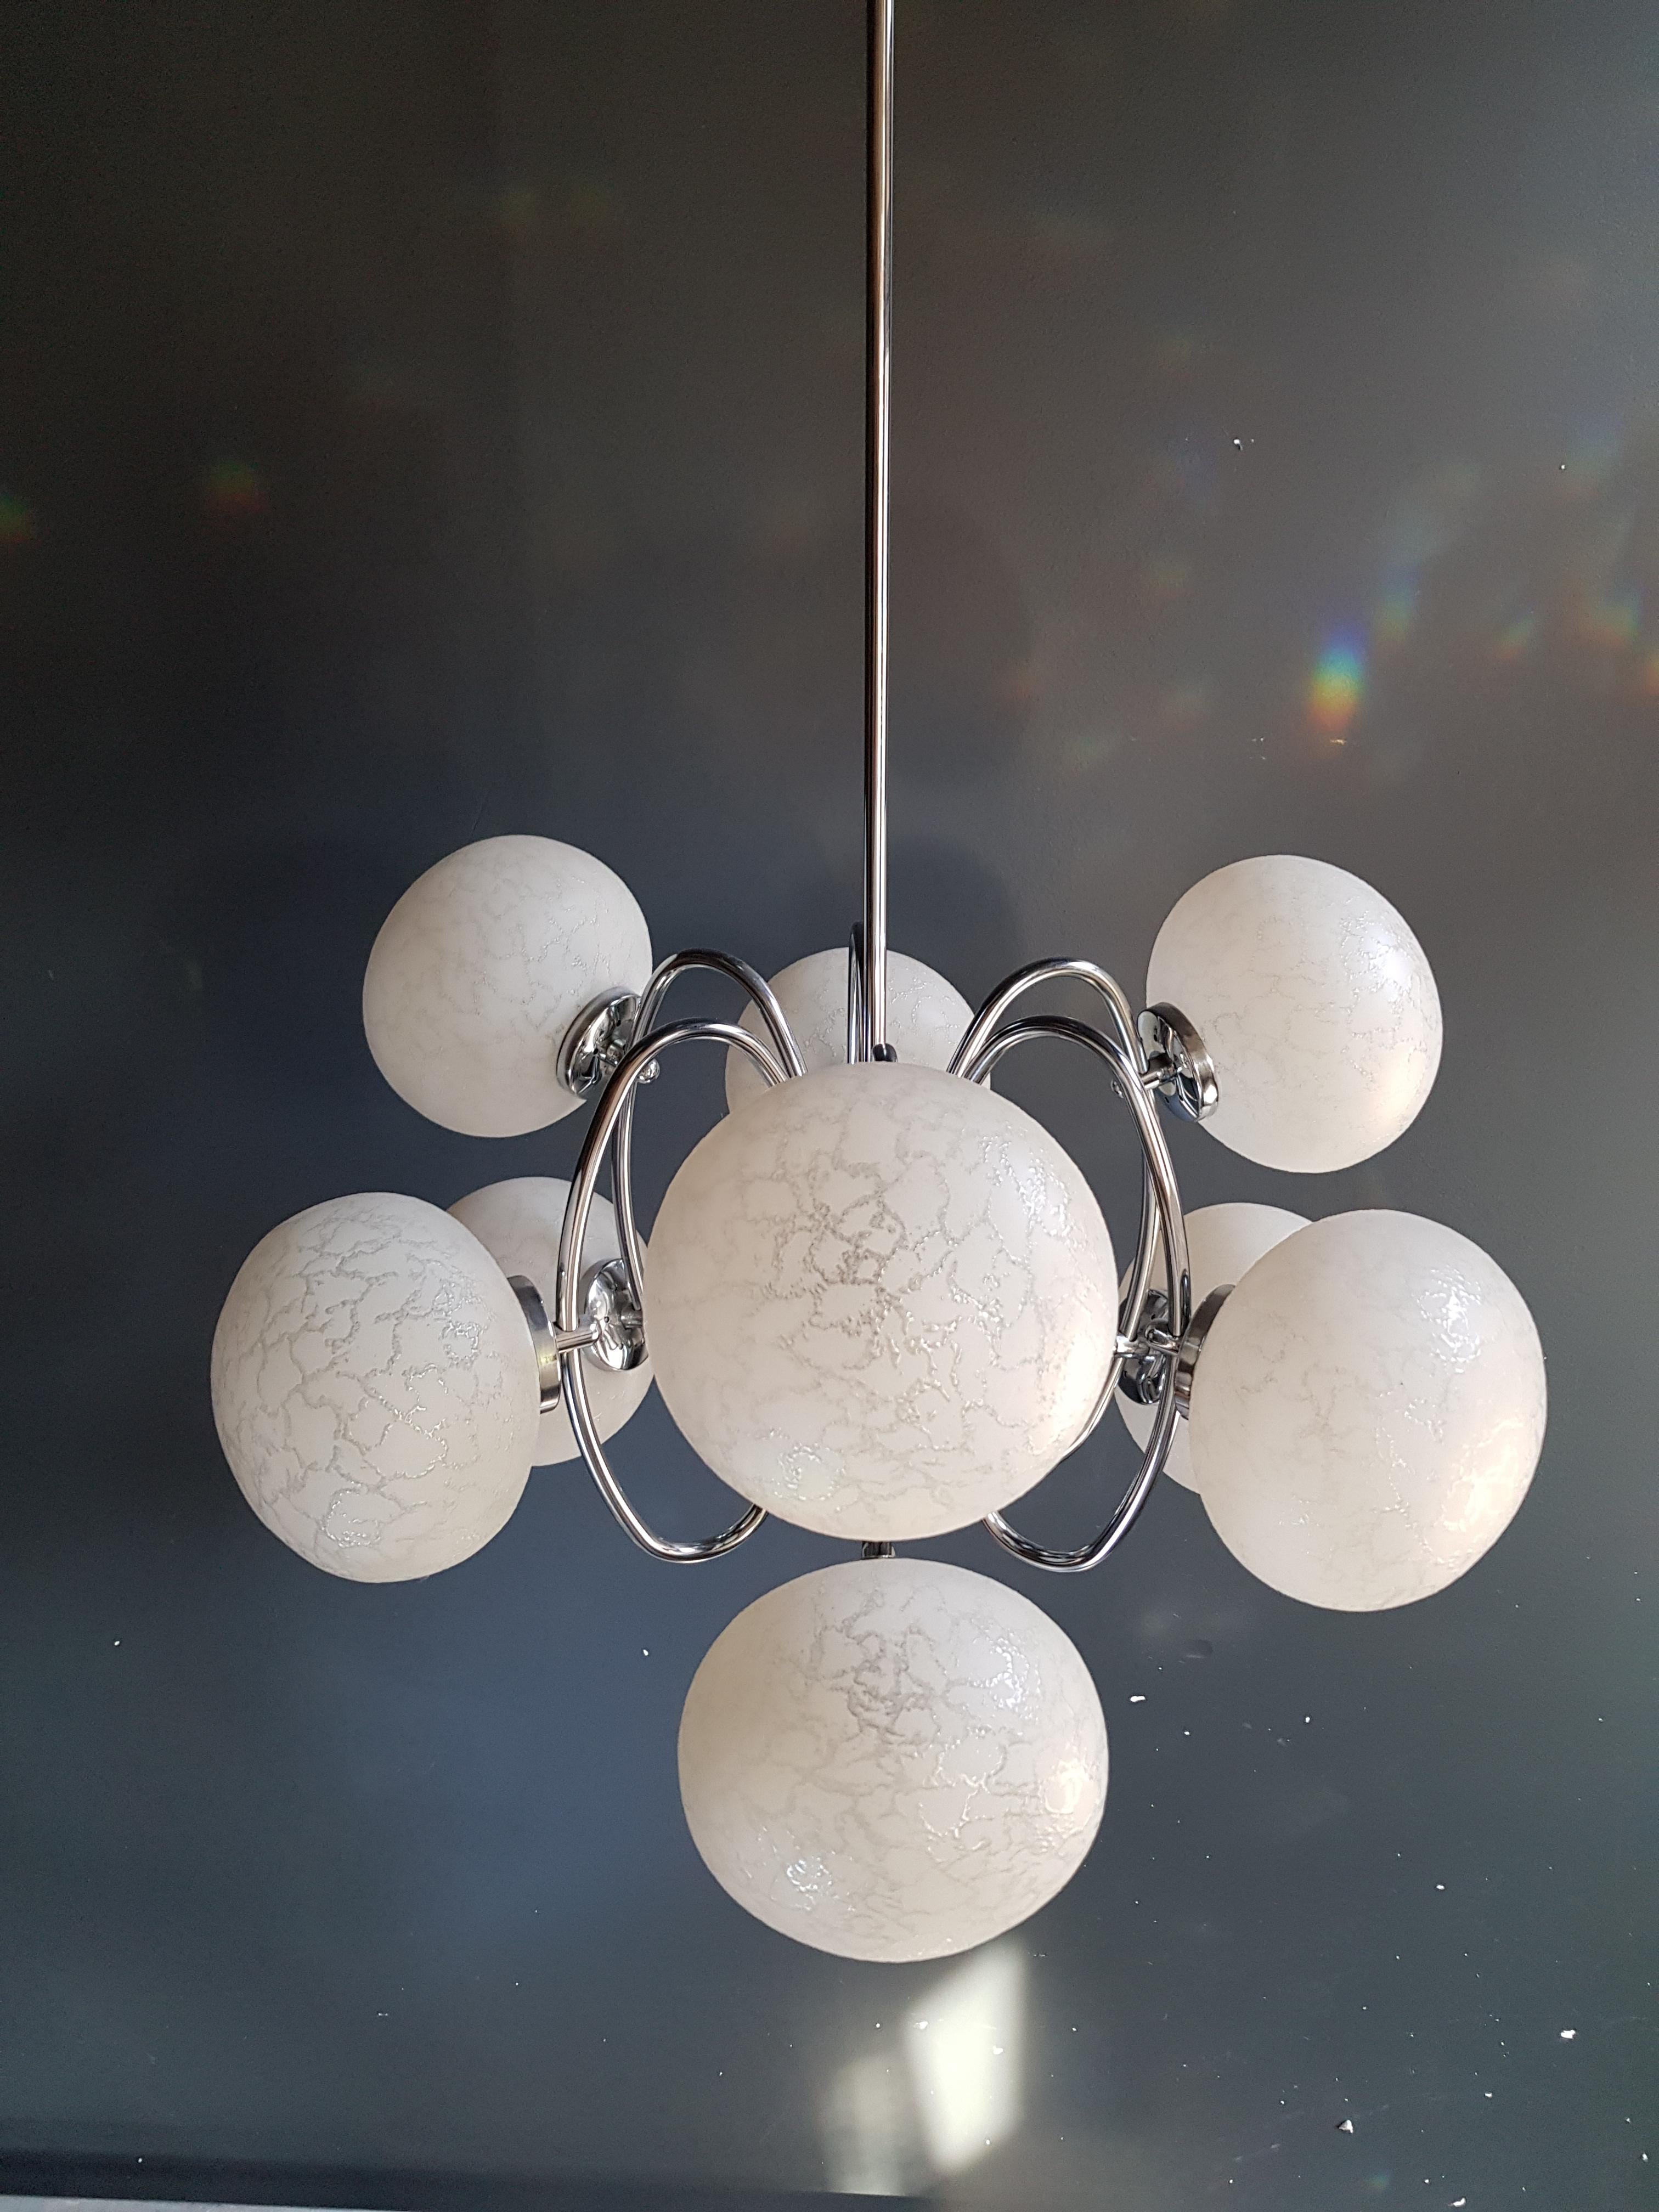 1970s Vintage Pendant Chandelier - White Chrome Space Age UFO Atom Lamp

Introducing a captivating vintage pendant chandelier that perfectly encapsulates the 1970s Space Age aesthetic. This white chrome masterpiece draws inspiration from UFOs and